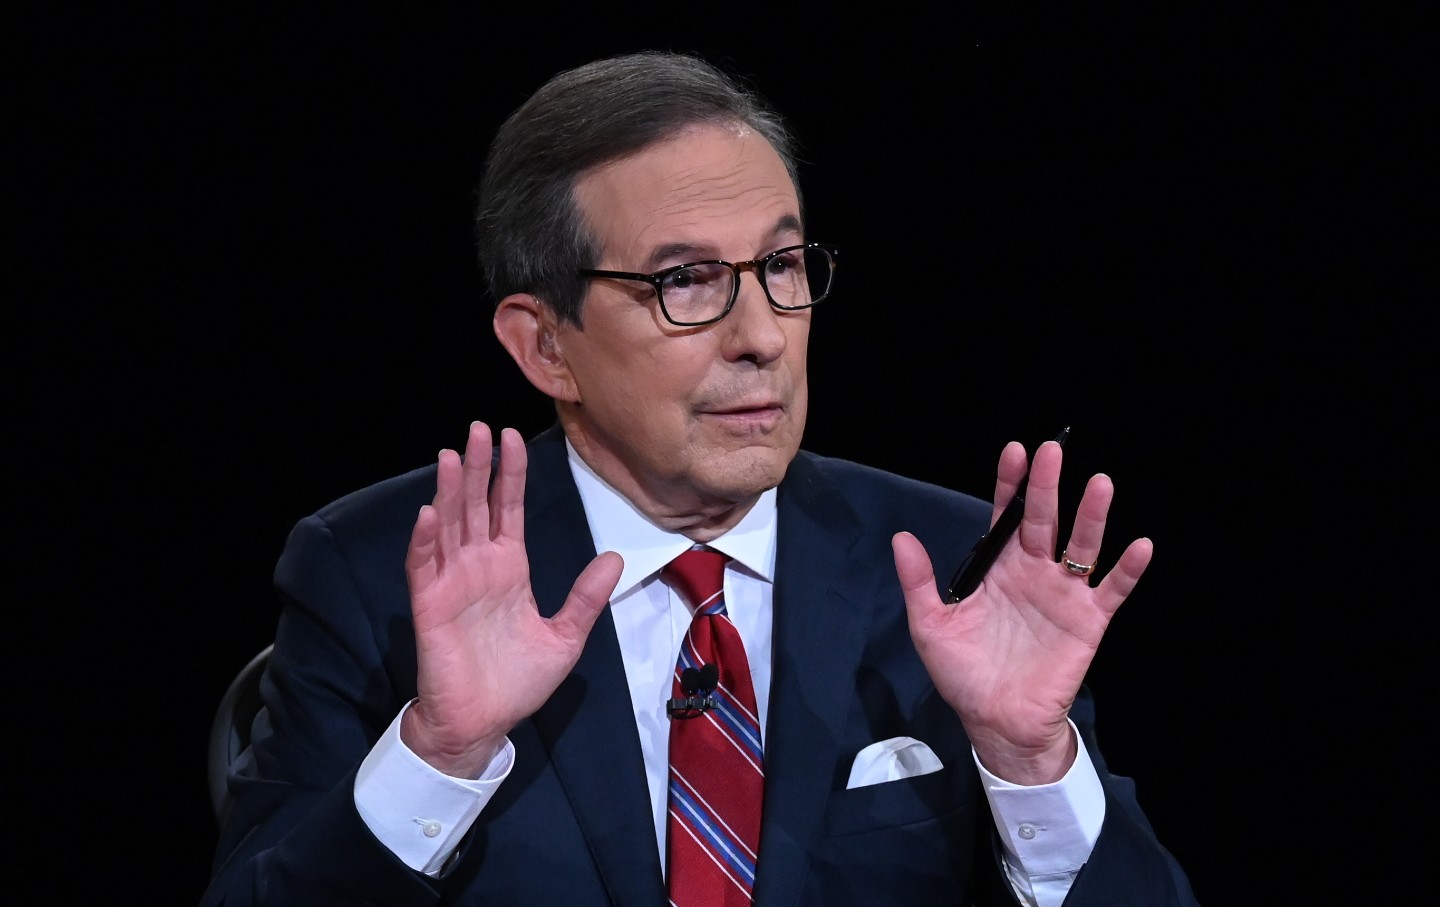 With Help From Chris Wallace, Trump Attacked American Democracy